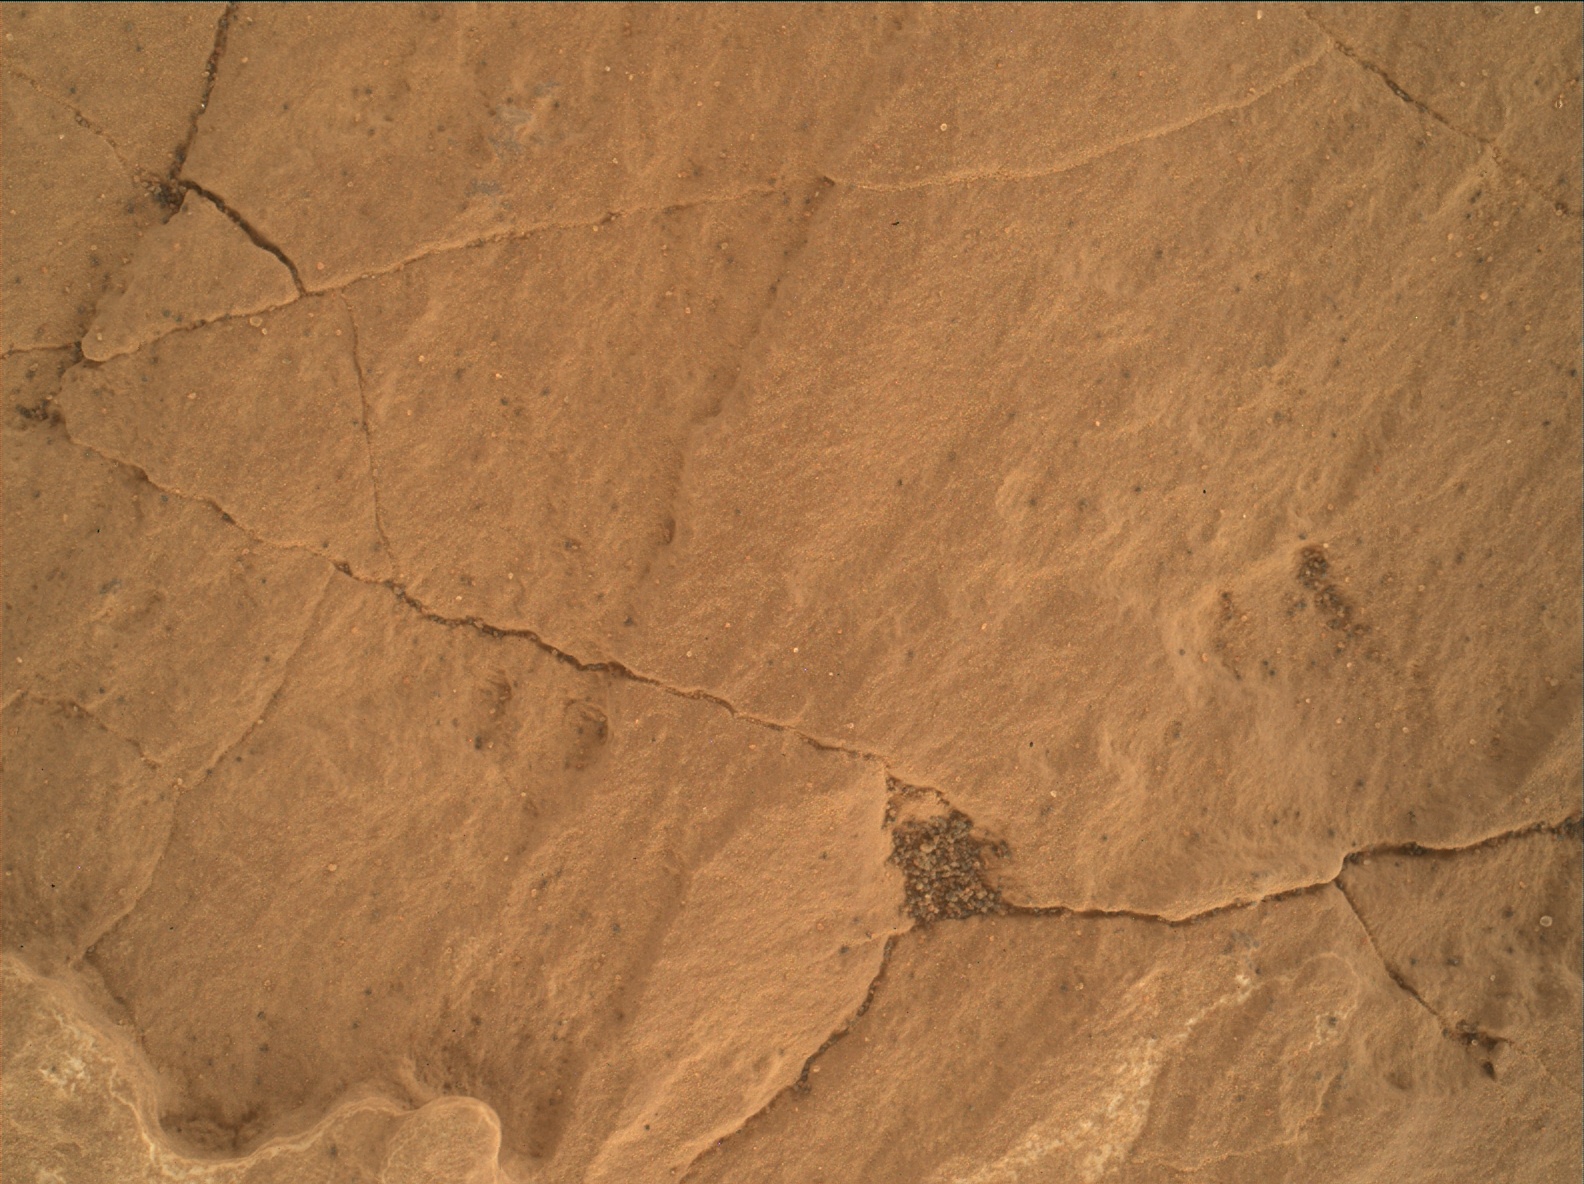 Nasa's Mars rover Curiosity acquired this image using its Mars Hand Lens Imager (MAHLI) on Sol 1677